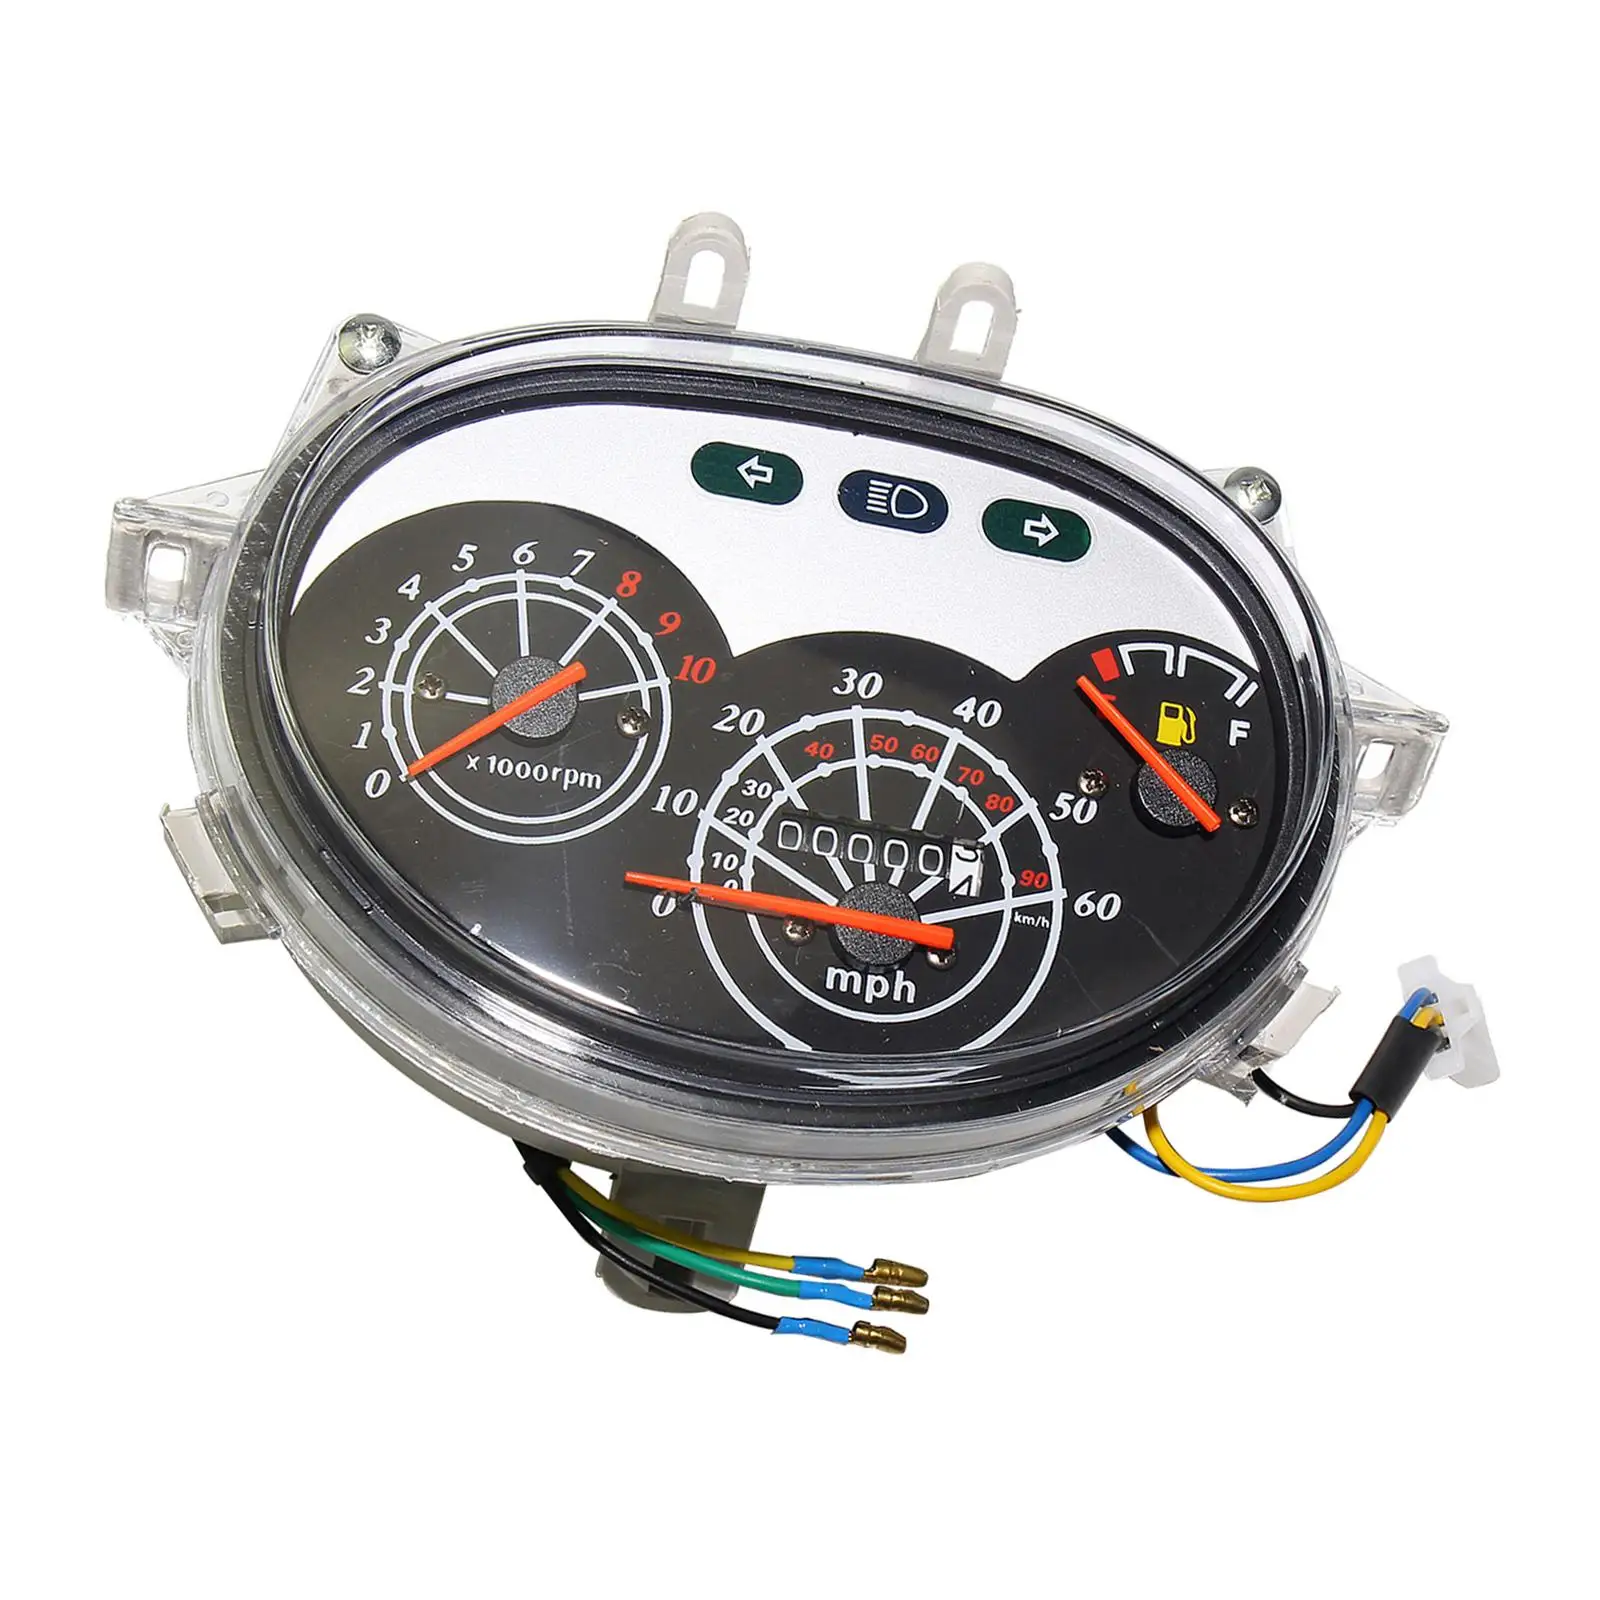 Motorcycle Dashboard ometer, Instrument, Odometer Meter, Universal Fuel Level Plug Replacement